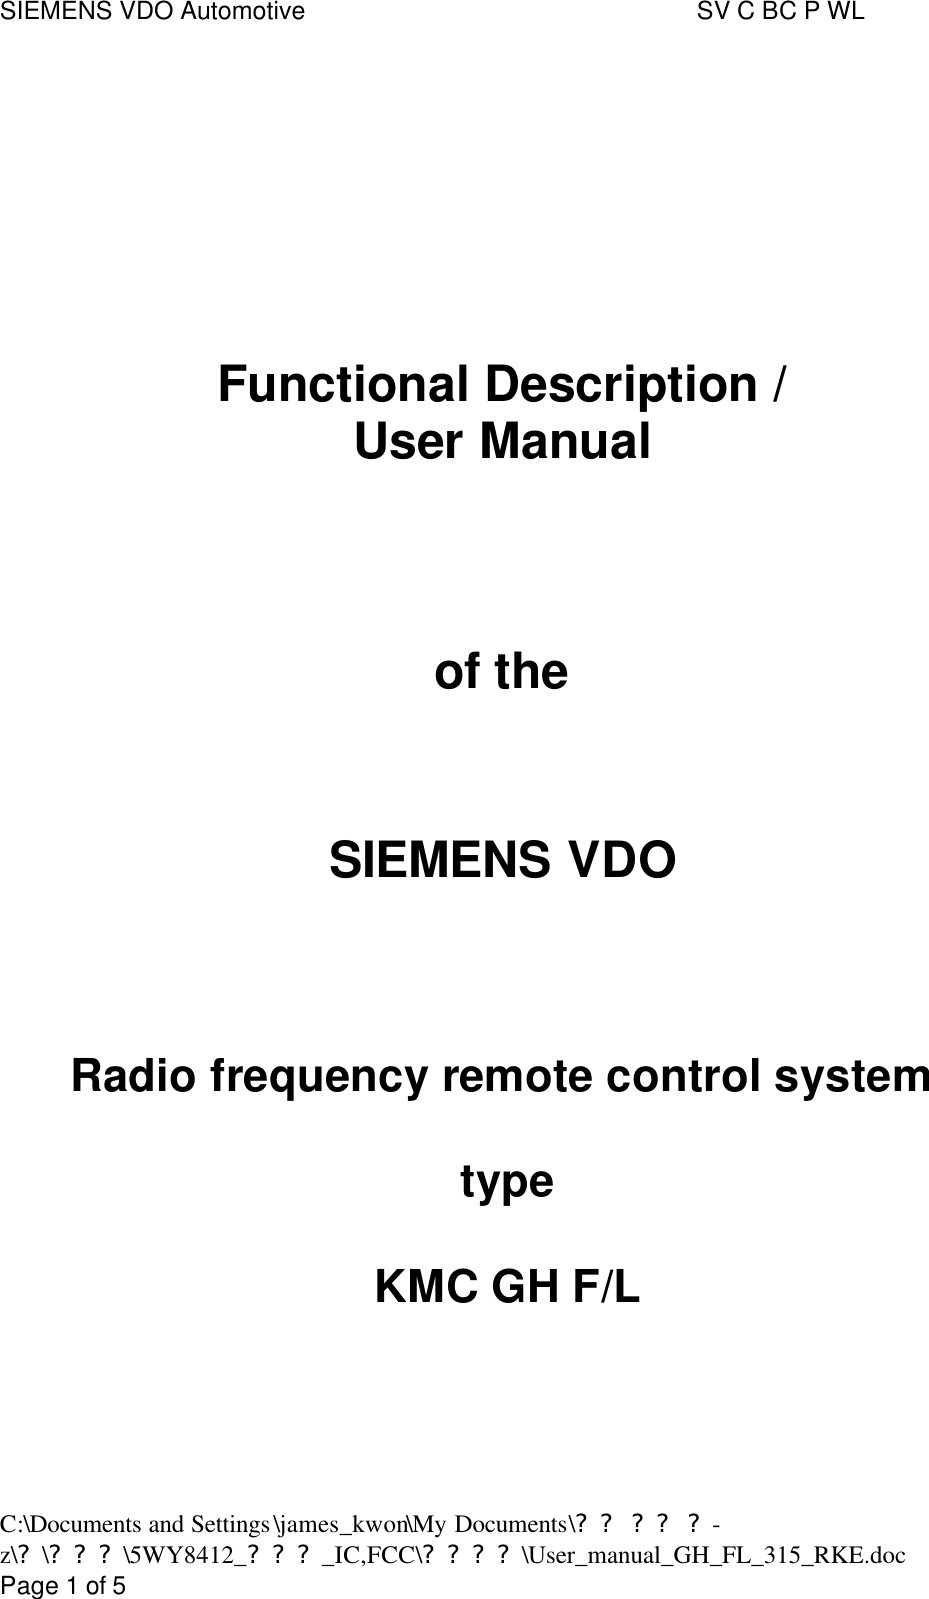 SIEMENS VDO Automotive     SV C BC P WL C:\Documents and Settings\james_kwon\My Documents\?? ?? ?-z\?\???\5WY8412_???_IC,FCC\????\User_manual_GH_FL_315_RKE.doc      Page 1 of 5       Functional Description / User Manual     of the   SIEMENS VDO    Radio frequency remote control system   type   KMC GH F/L      